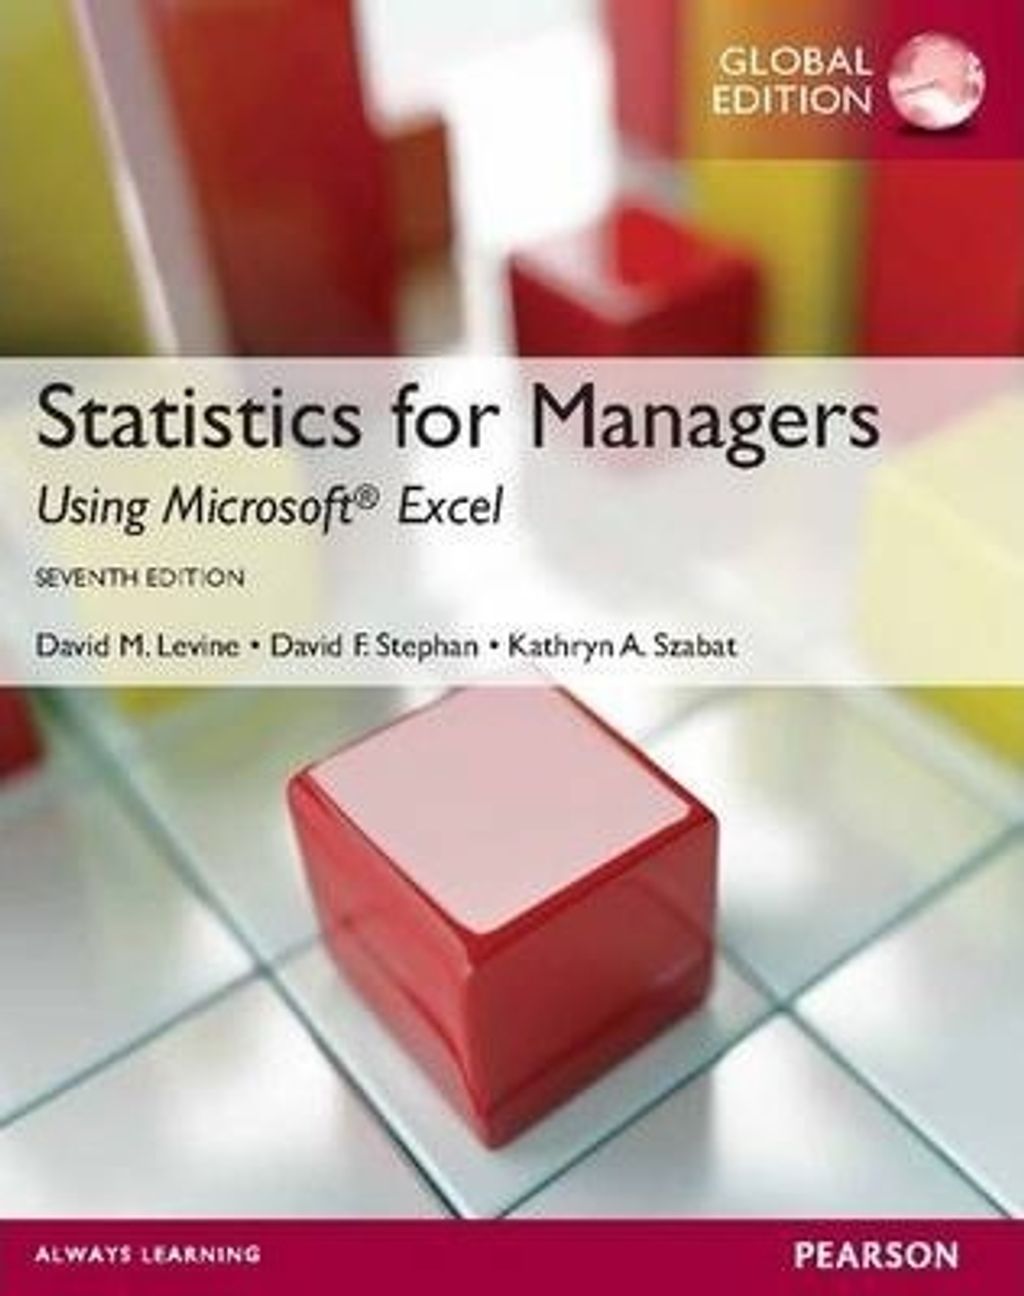 9780273787112 STATISTICS FOR MANAGES USING MS EXCEL 7E LEVINE.jpg